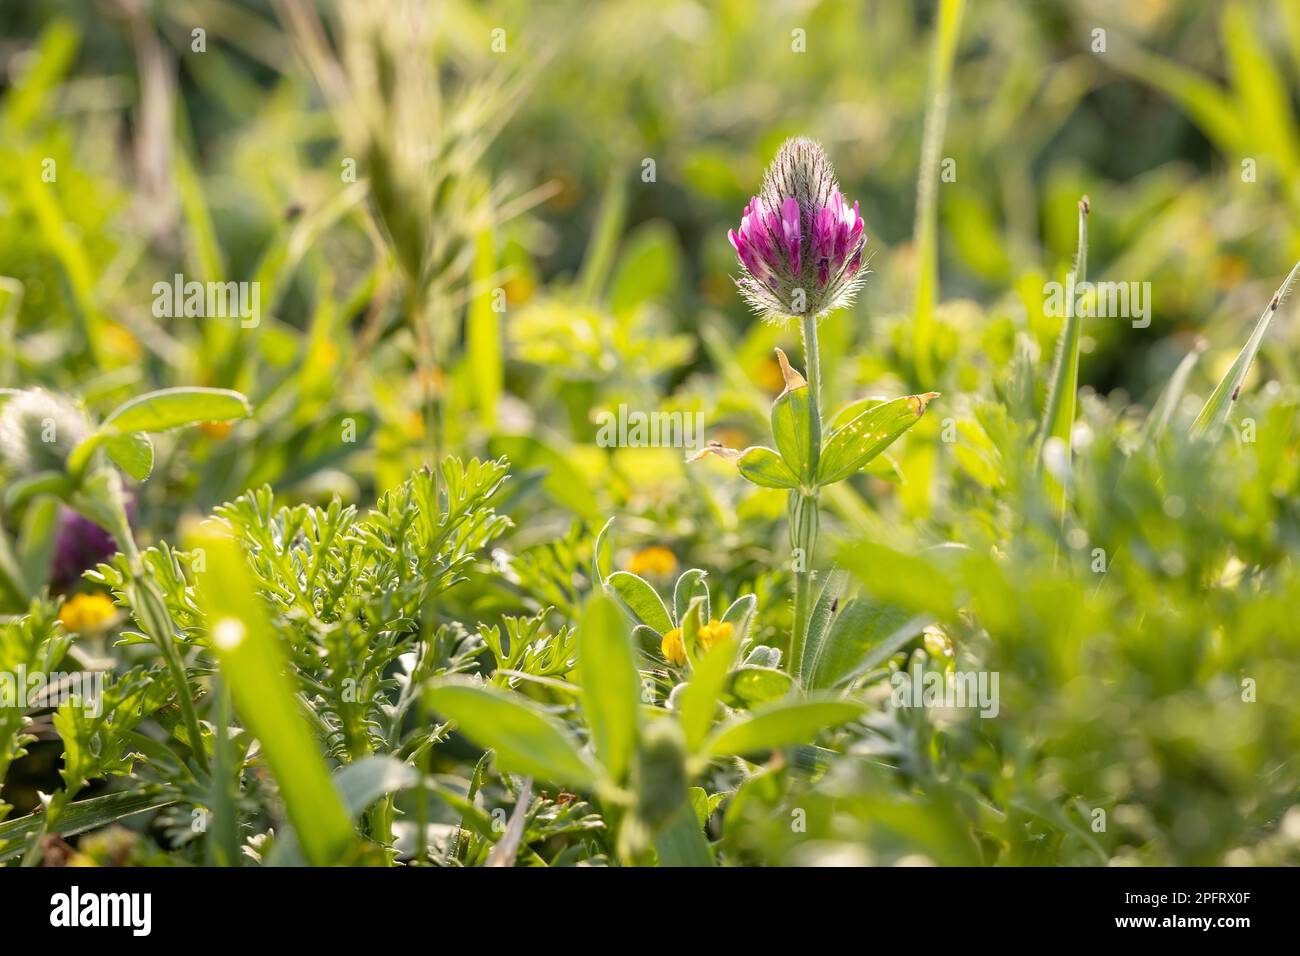 Flora of Israel. Square frame. Trifolium purpureum is in early spring in a meadow at sunset. Stock Photo